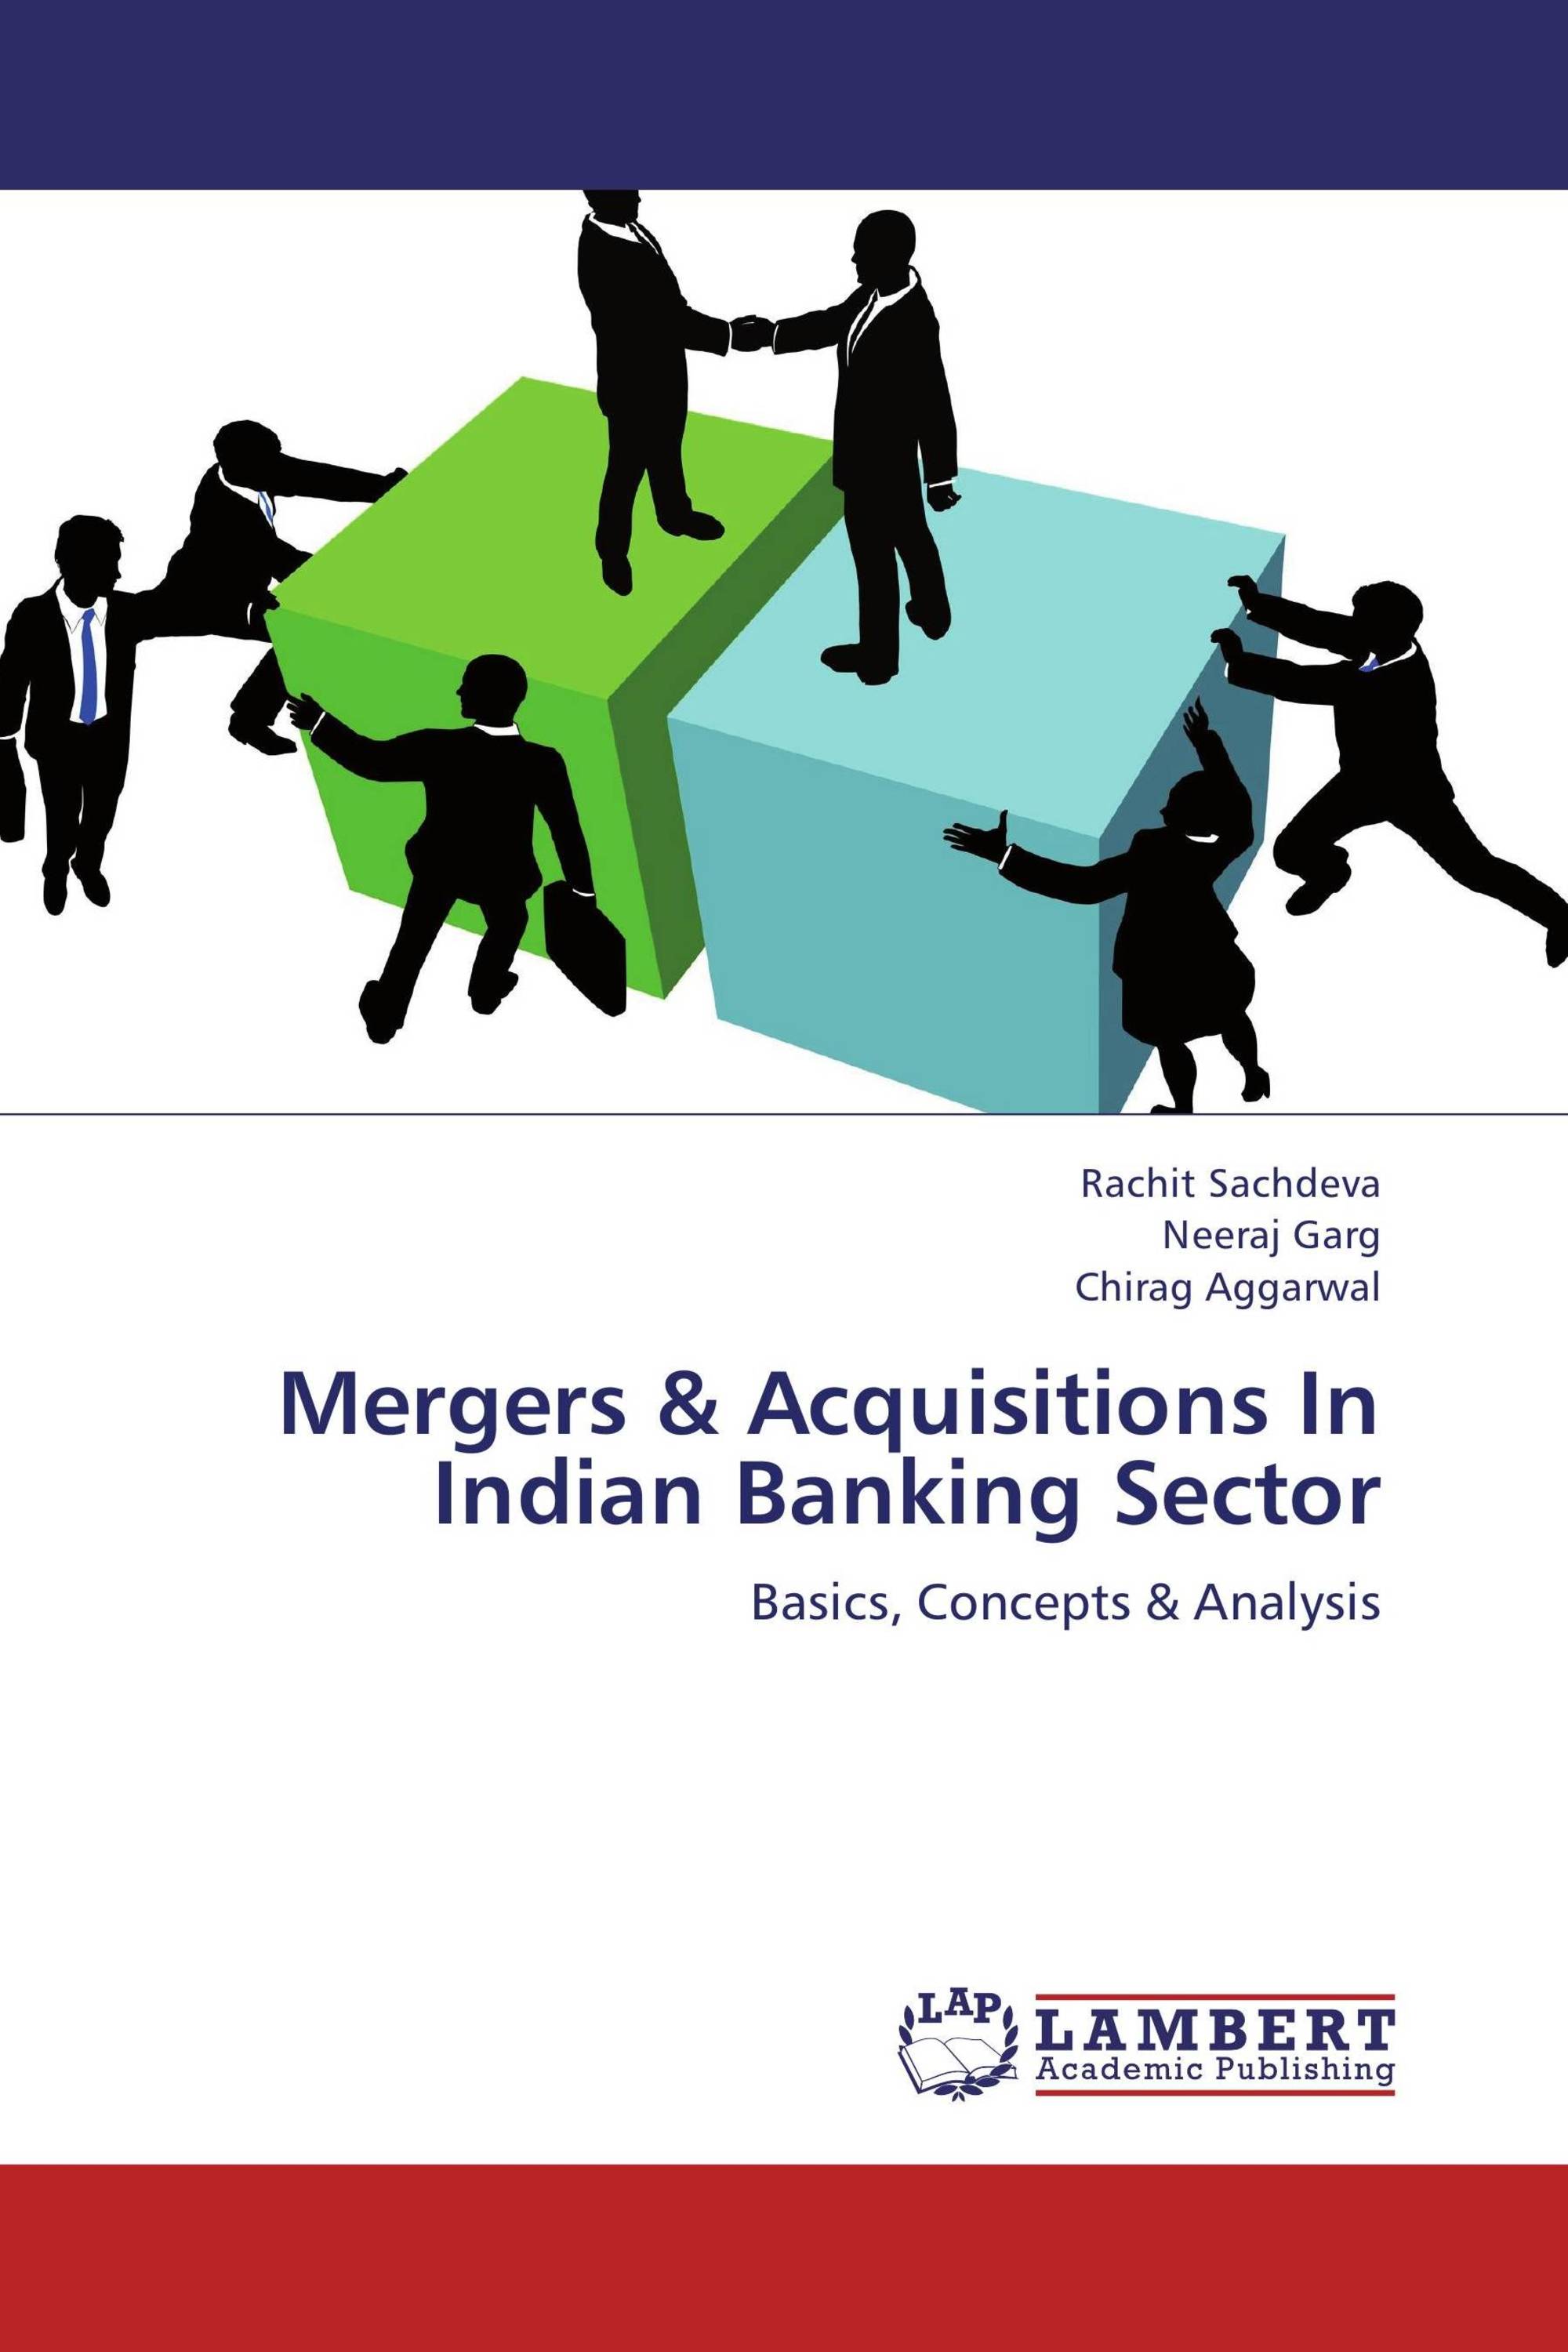 mergers and acquisitions case studies in india